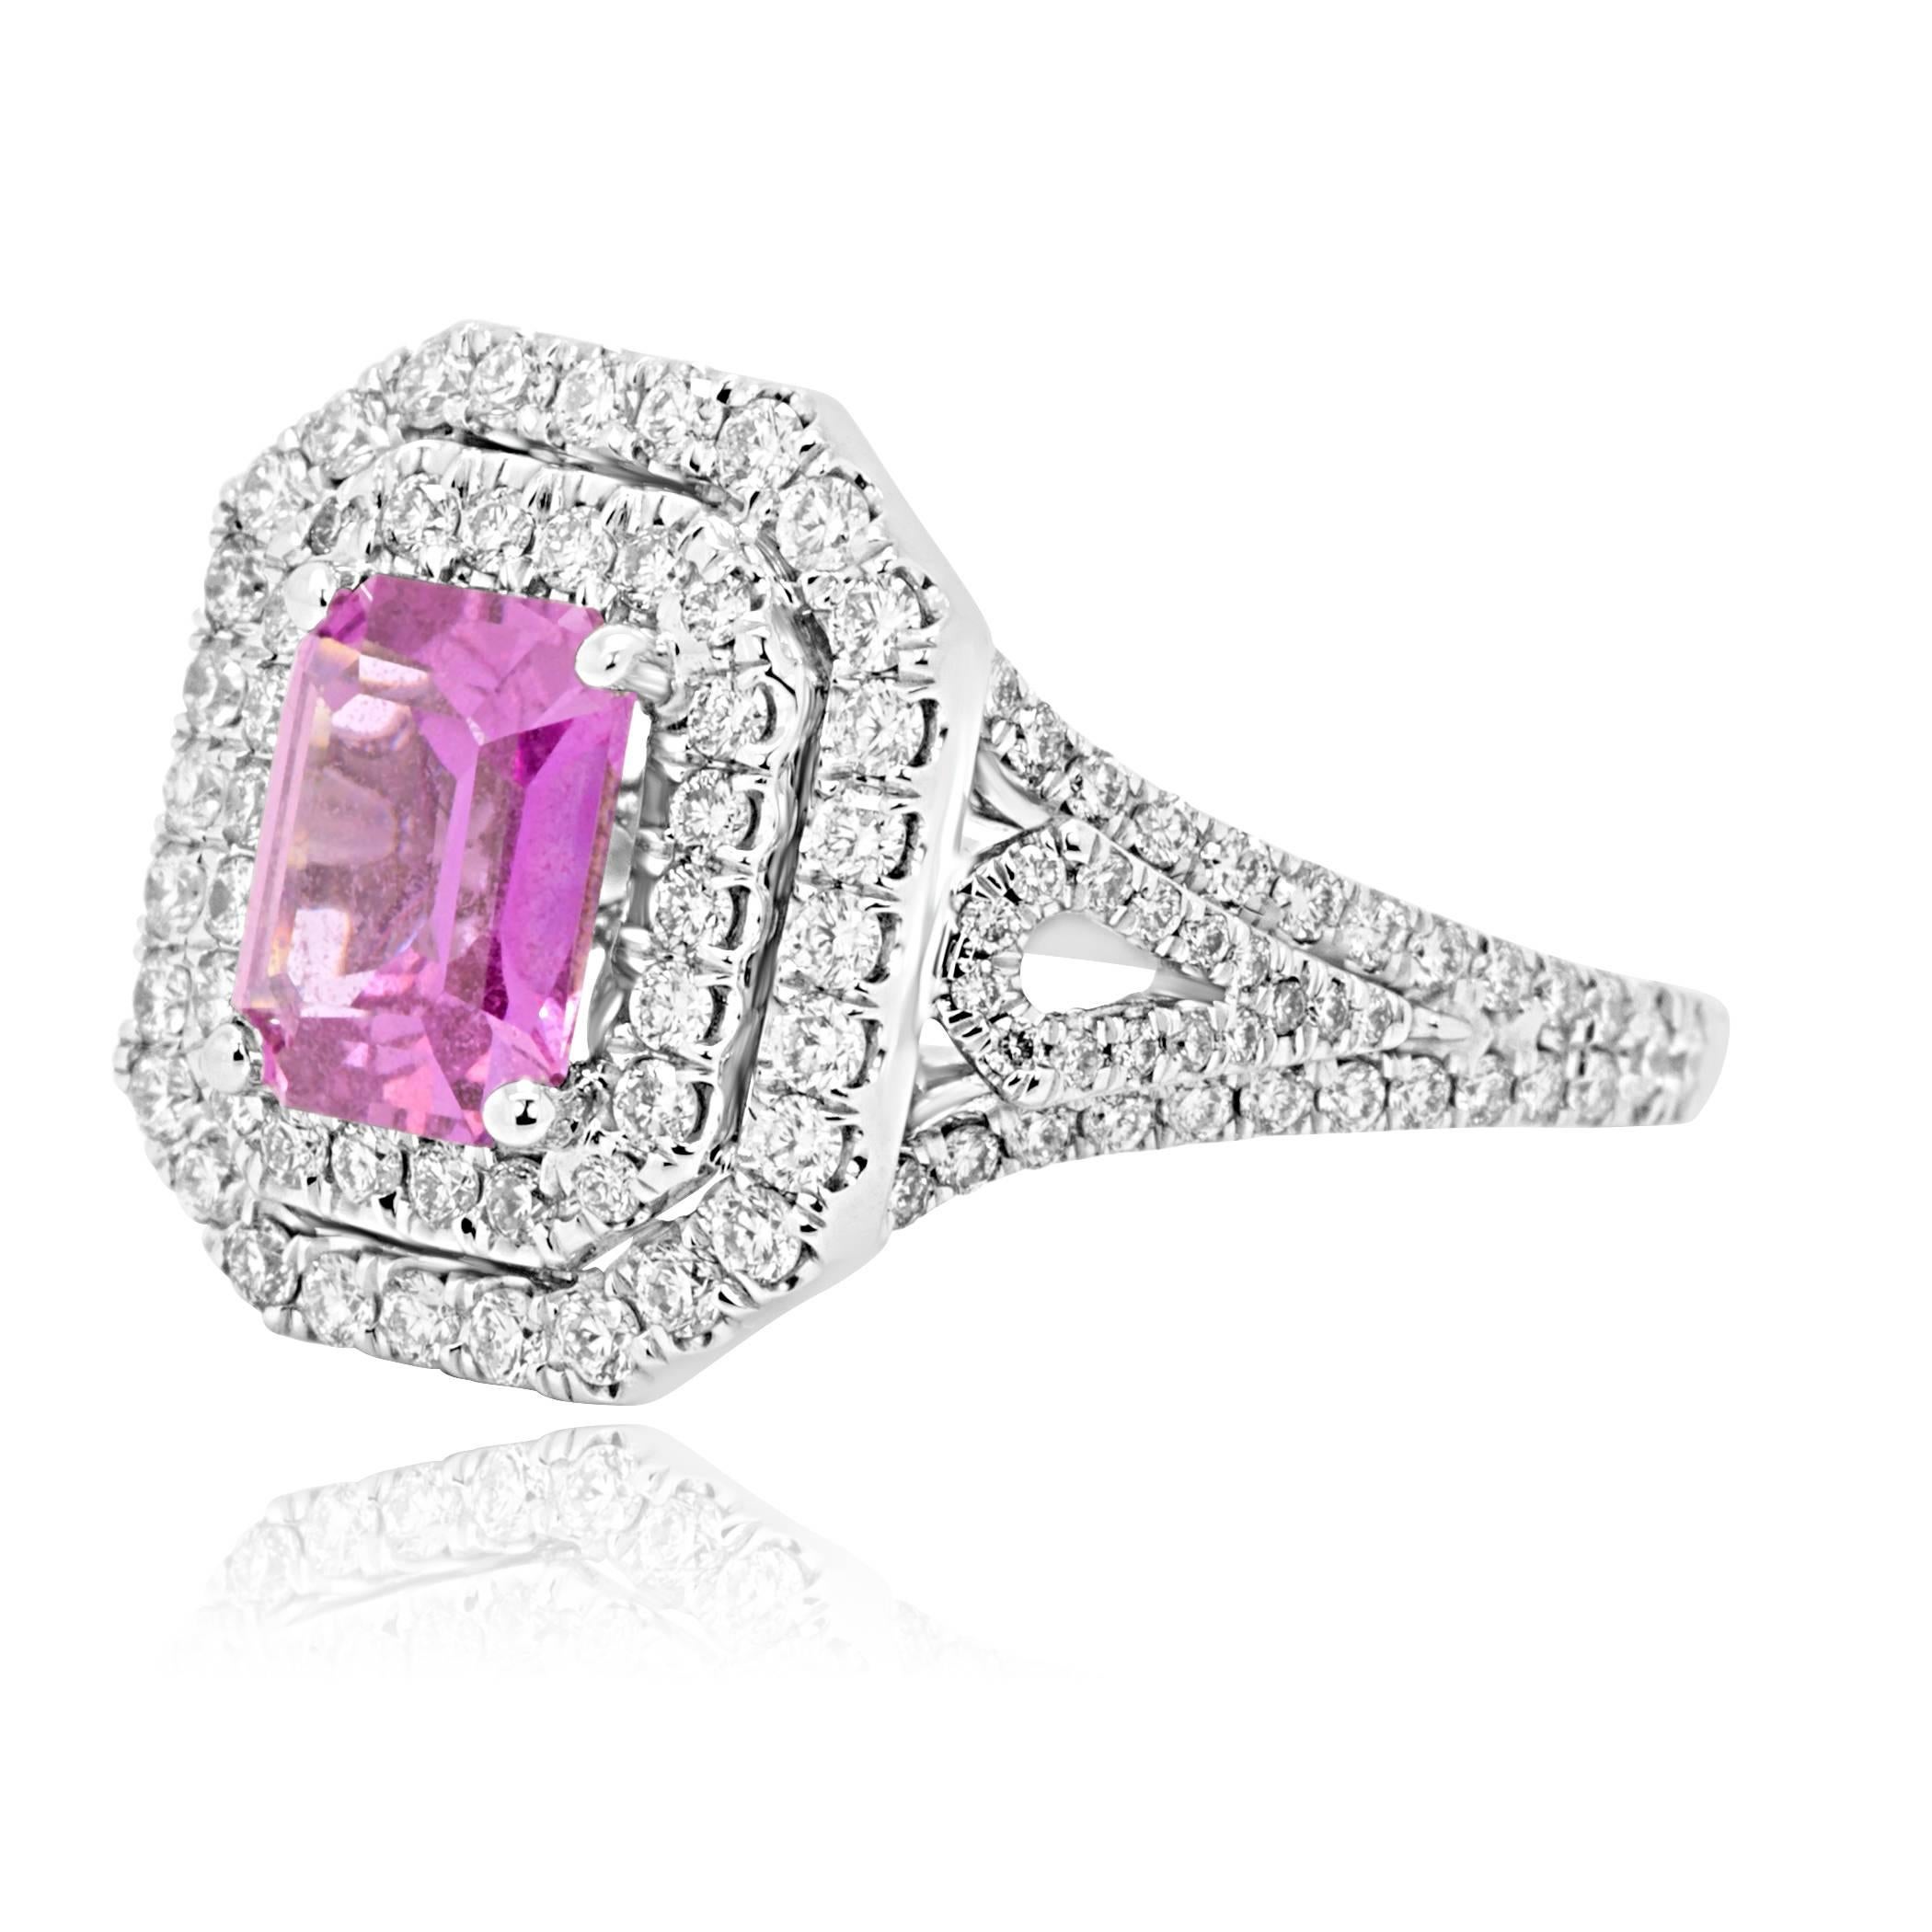 Beautiful GIA Certified No Heat Emerald Cut Pink Sapphire 1.73 Carat encircled in a double halo White Round Diamonds 1.02 Carat in 18K White Gold Bridal Fashion Ring.

Style available in different price ranges. Prices are based on your selection of